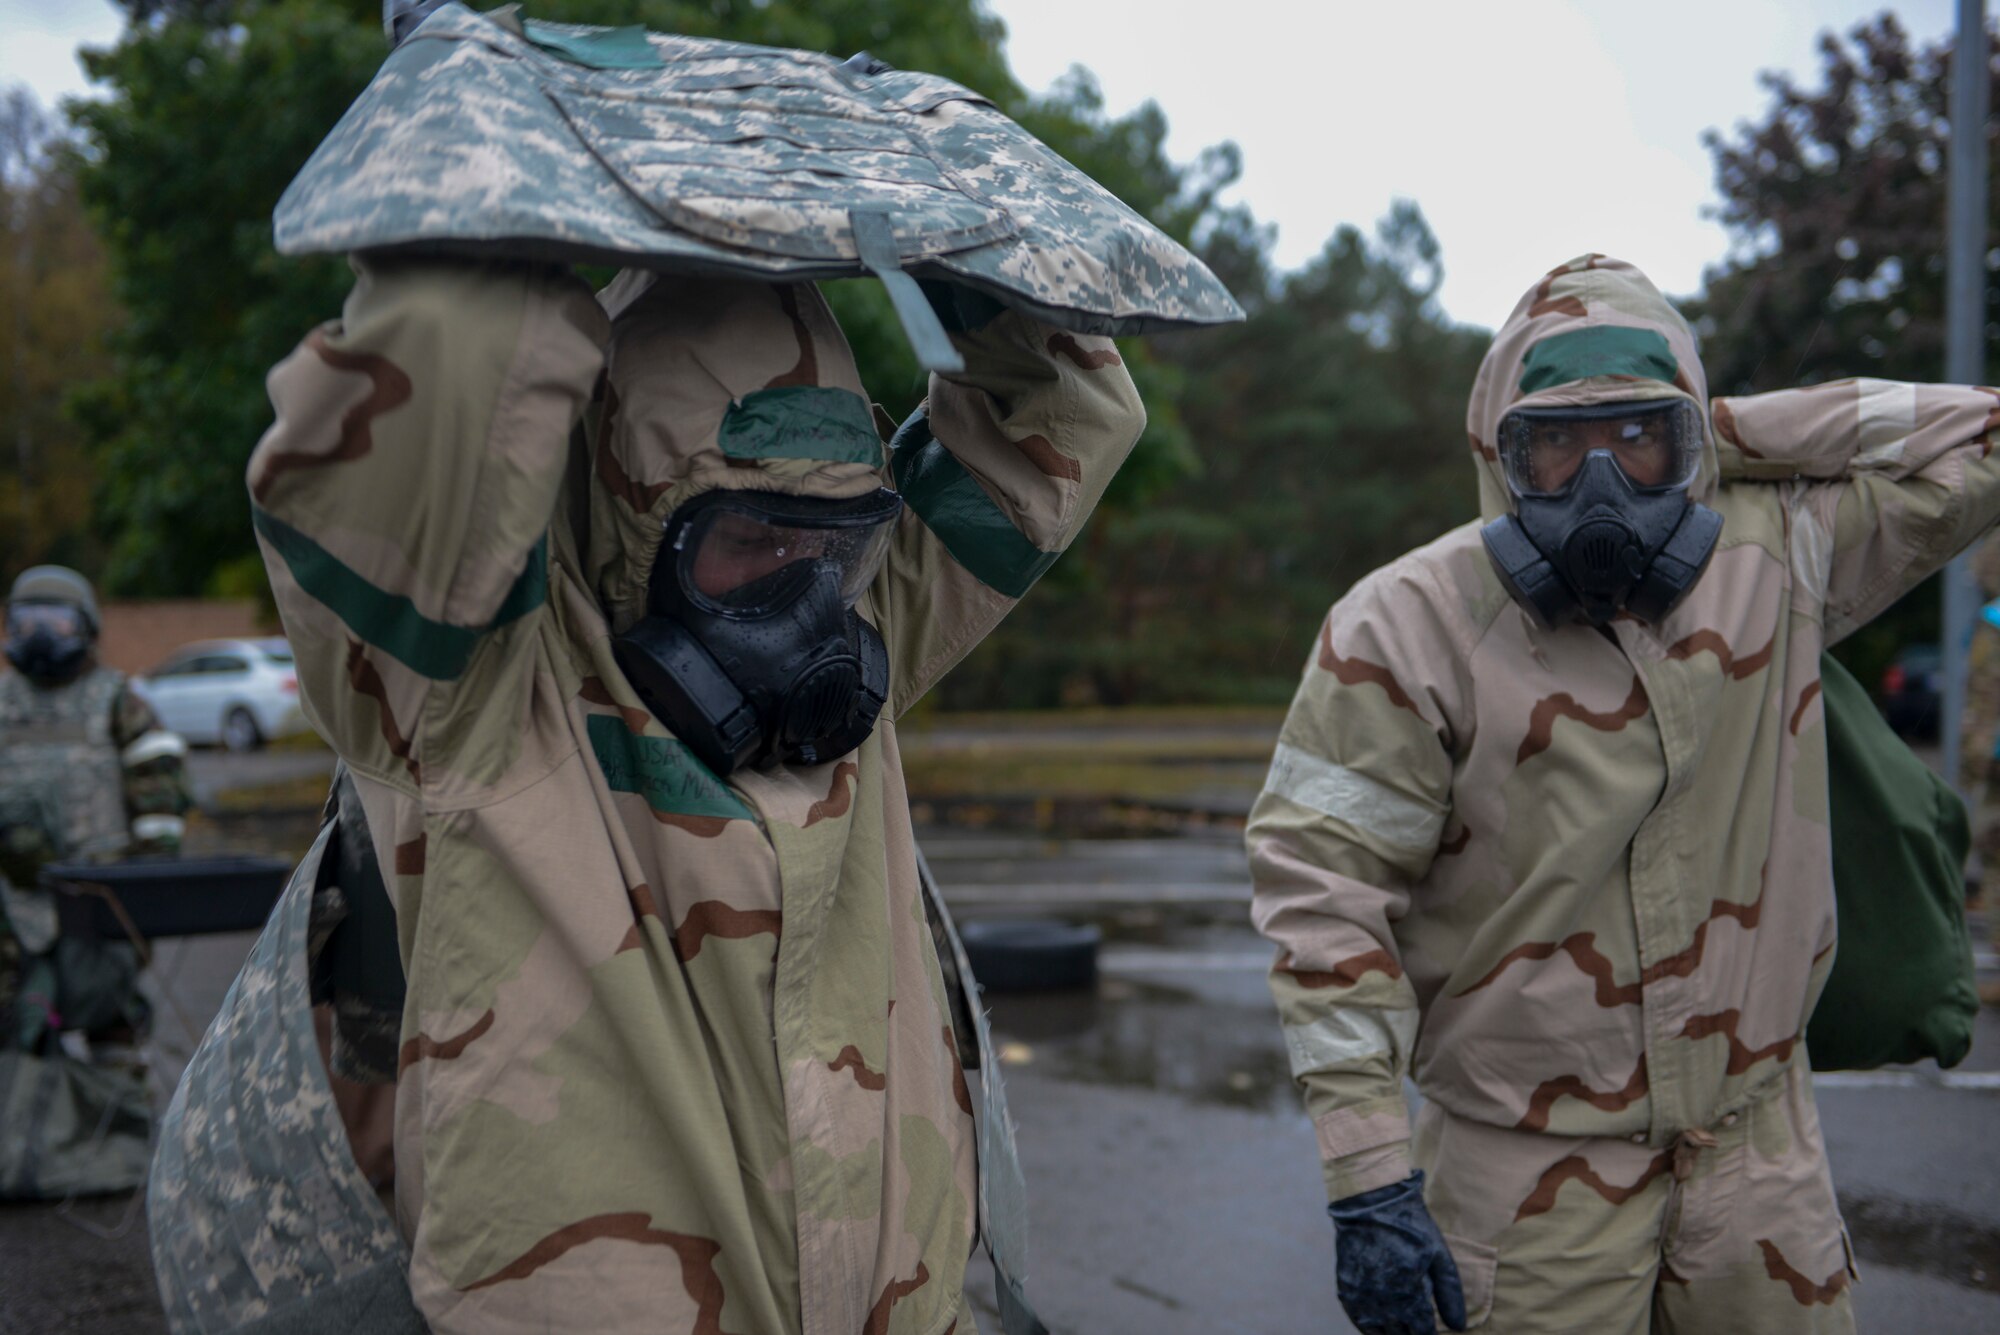 U.S. Airmen doff their individual protective equipment as part of Operation Varsity 19-03 at Ramstein Air Base, Germany, Sept. 27, 2019. Airmen assigned to both the 86th Airlift Wing and 521st Air Mobility Operations Wing simulated decontaminating their equipment to become more familiar with the process. (U.S. Air Force photo by Tech. Sgt. Timothy Moore)